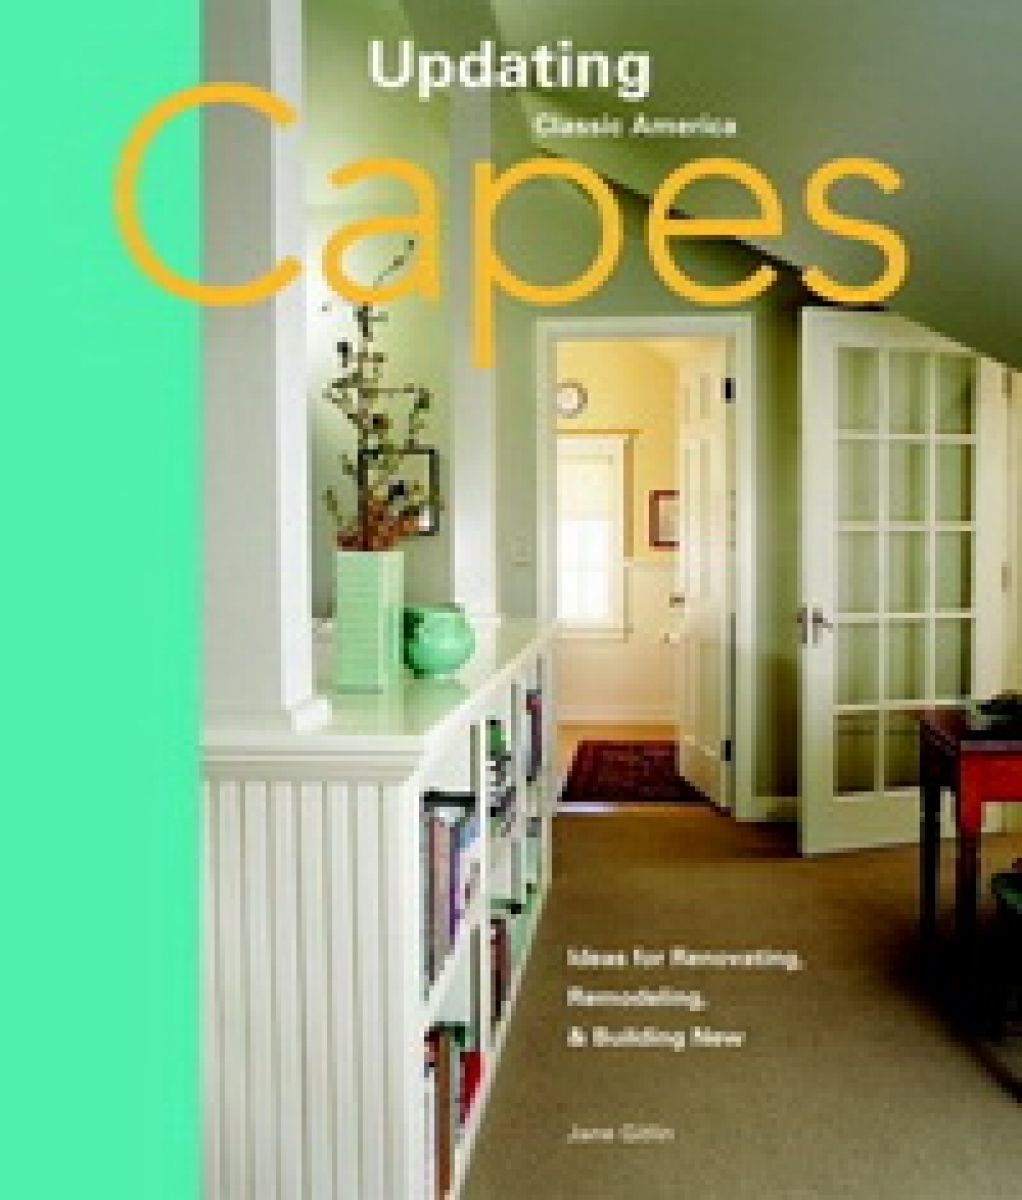 Jane G. Capes: Design Ideas for Renovating, Remodeling, and Building New (Updating Classic America) 